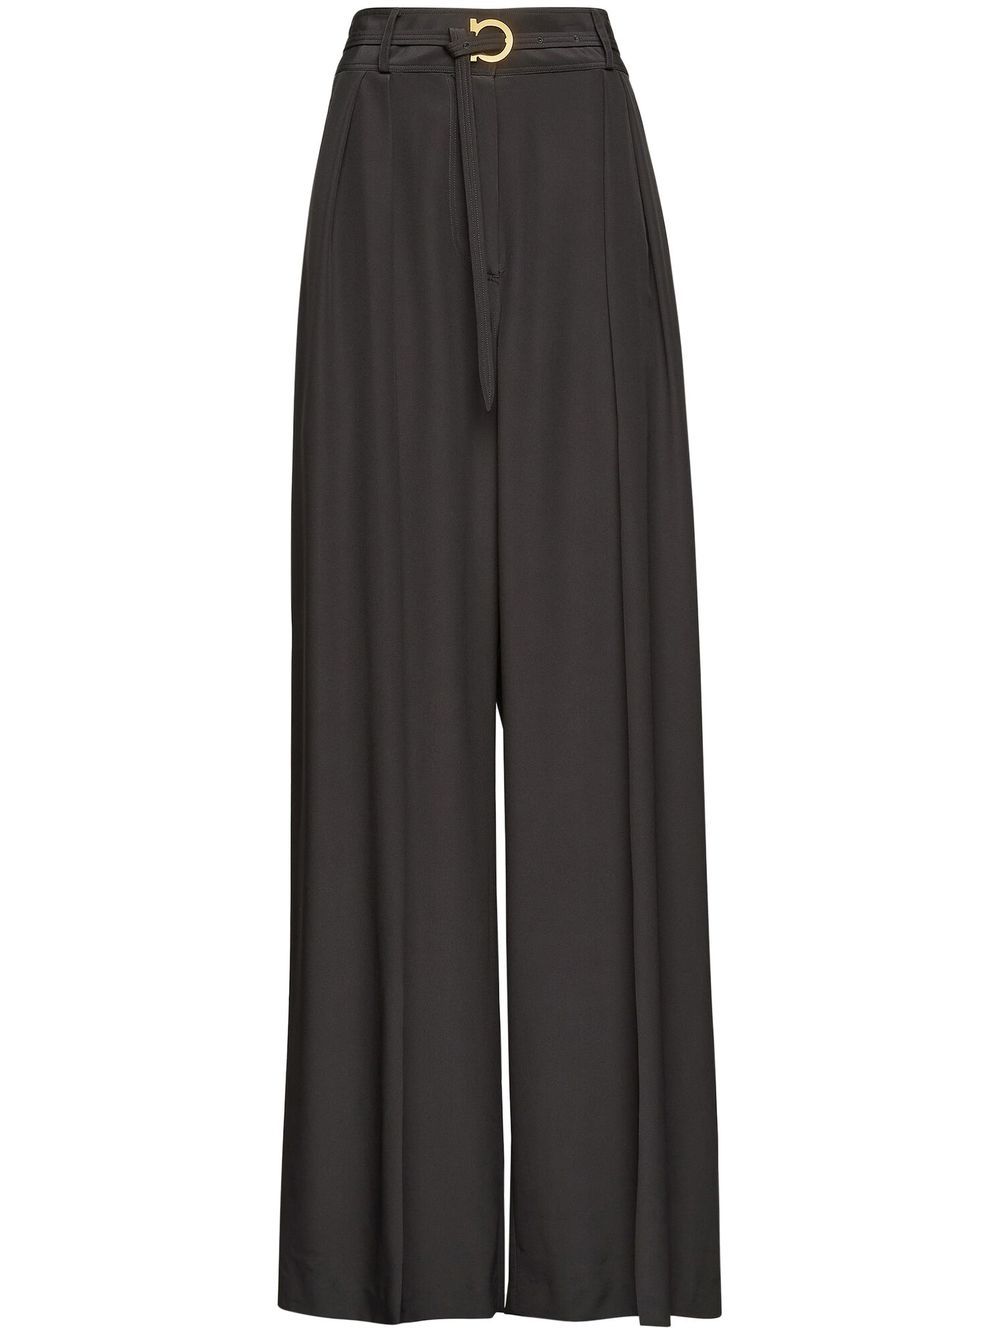 Image 1 of Ferragamo belted palazzo trousers